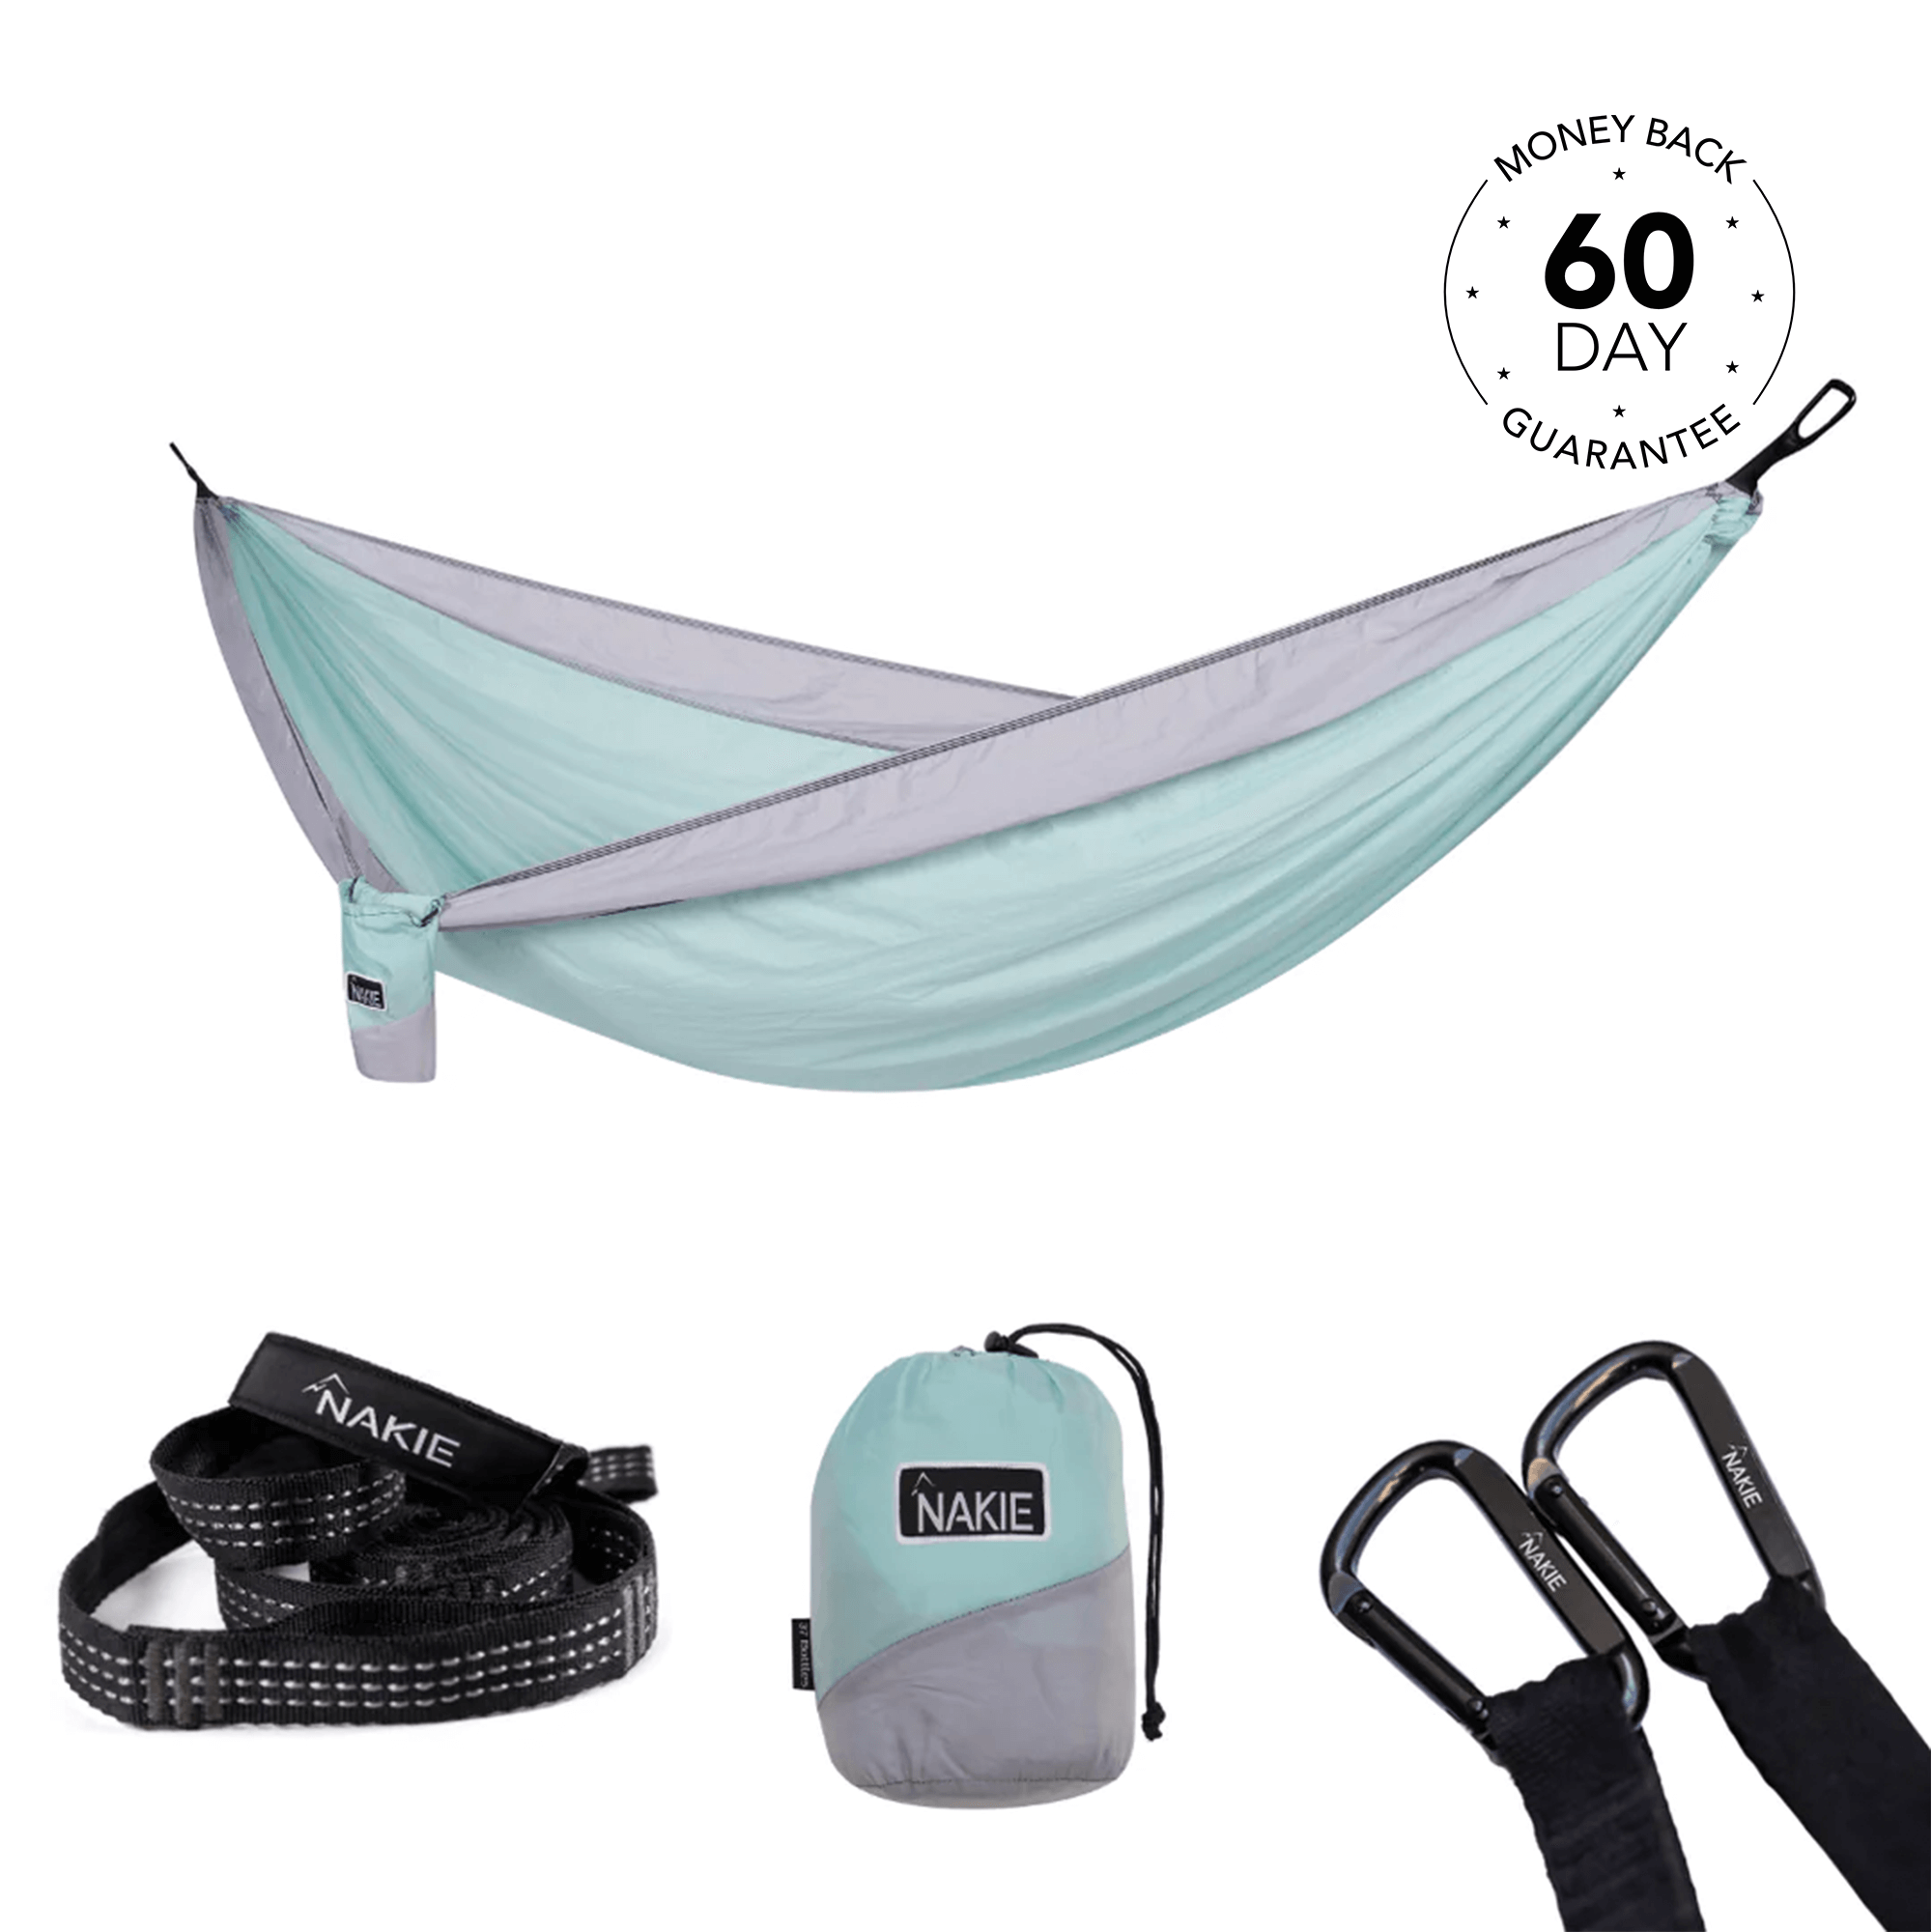 Twilight Blue - Recycled Hammock with Straps